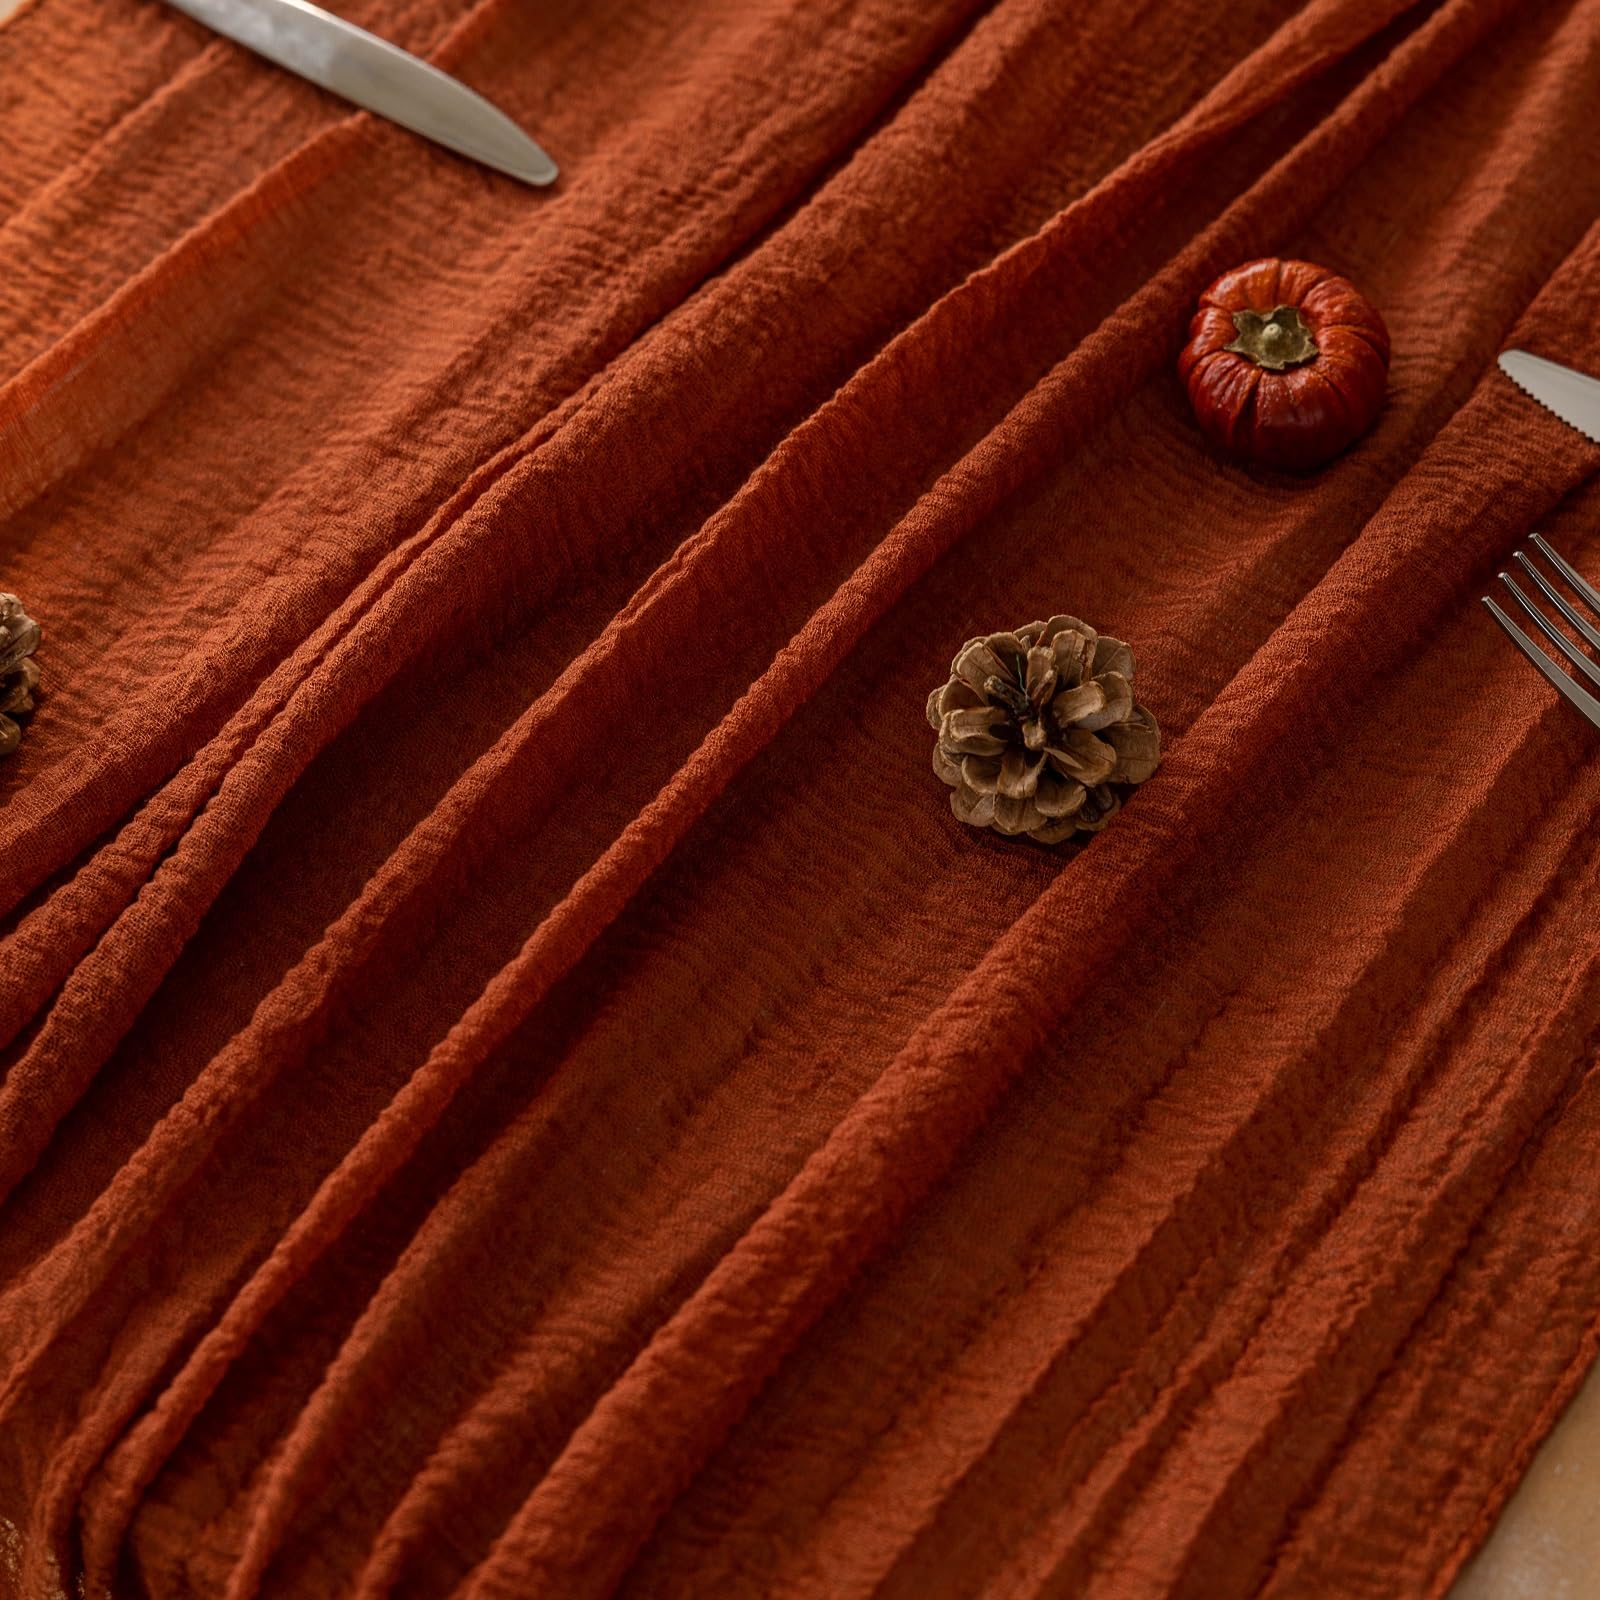 Keketo Cheesecloth Table Runner Terracotta Rust Gauze 120 Inch 10 FT Rustic Burnt Orange Cheese Cloth Table Runner for Wedding Baby Bridal Shower Party Boho Sheer Spring Centerpiece Home Decoration